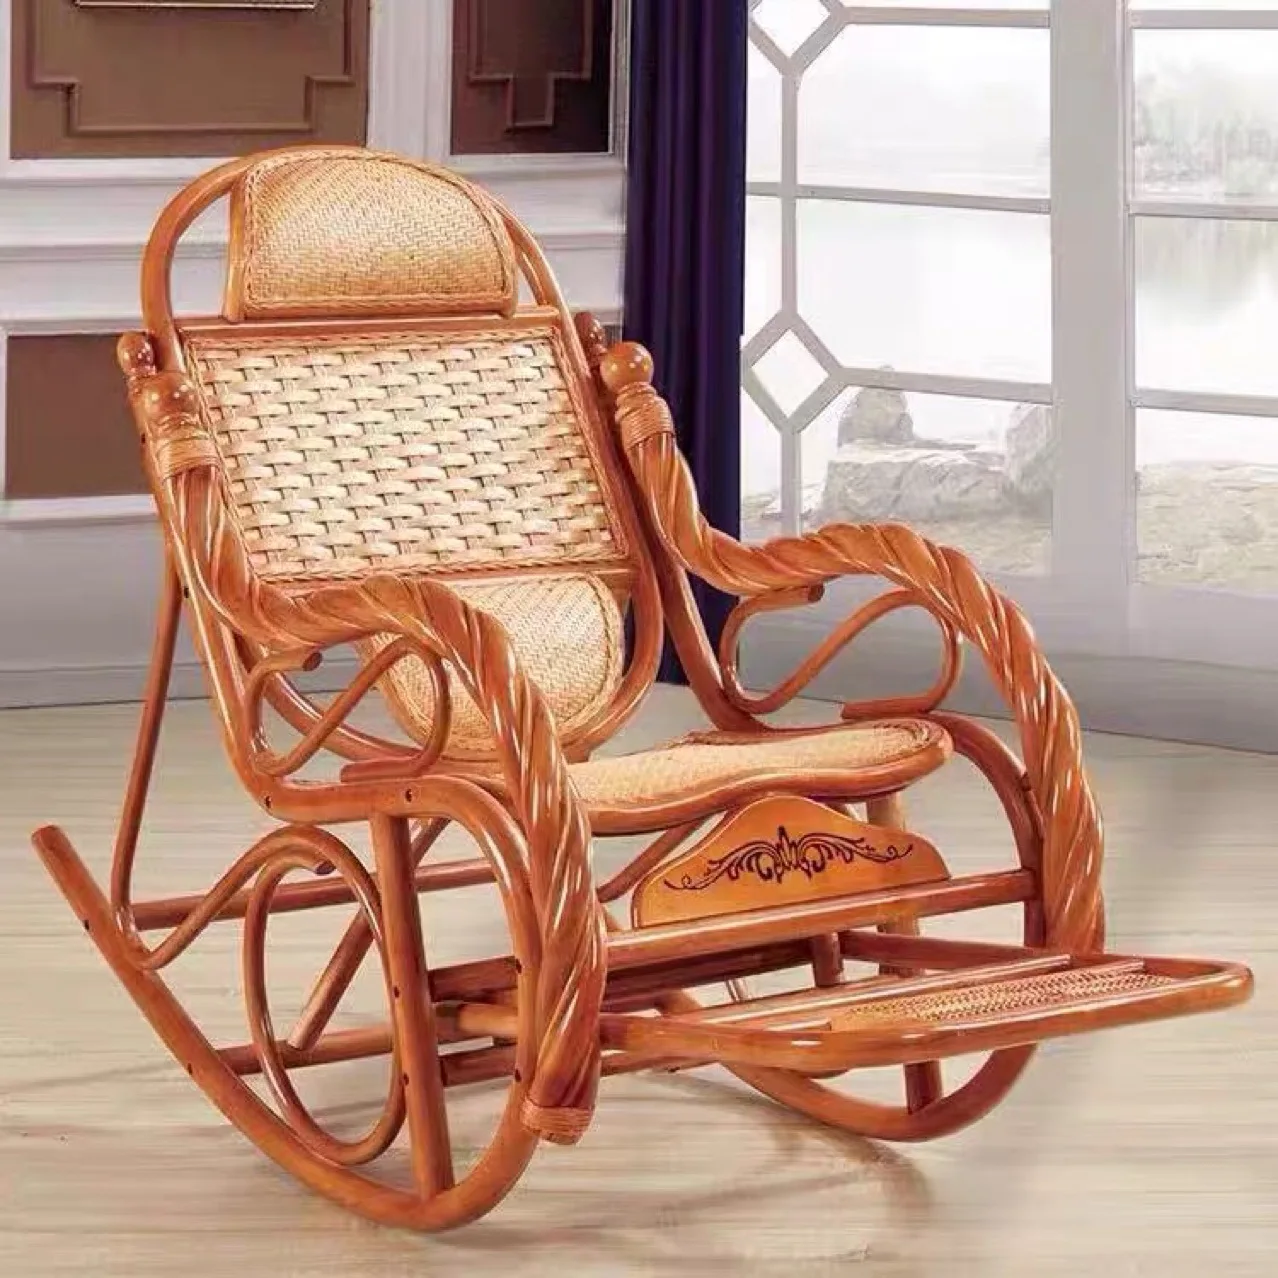 Luxury Rocking Chair With Cushions Rattan Wicker Furniture Indoor Living Room Glider Recliner Modern Rattan Easy Chair